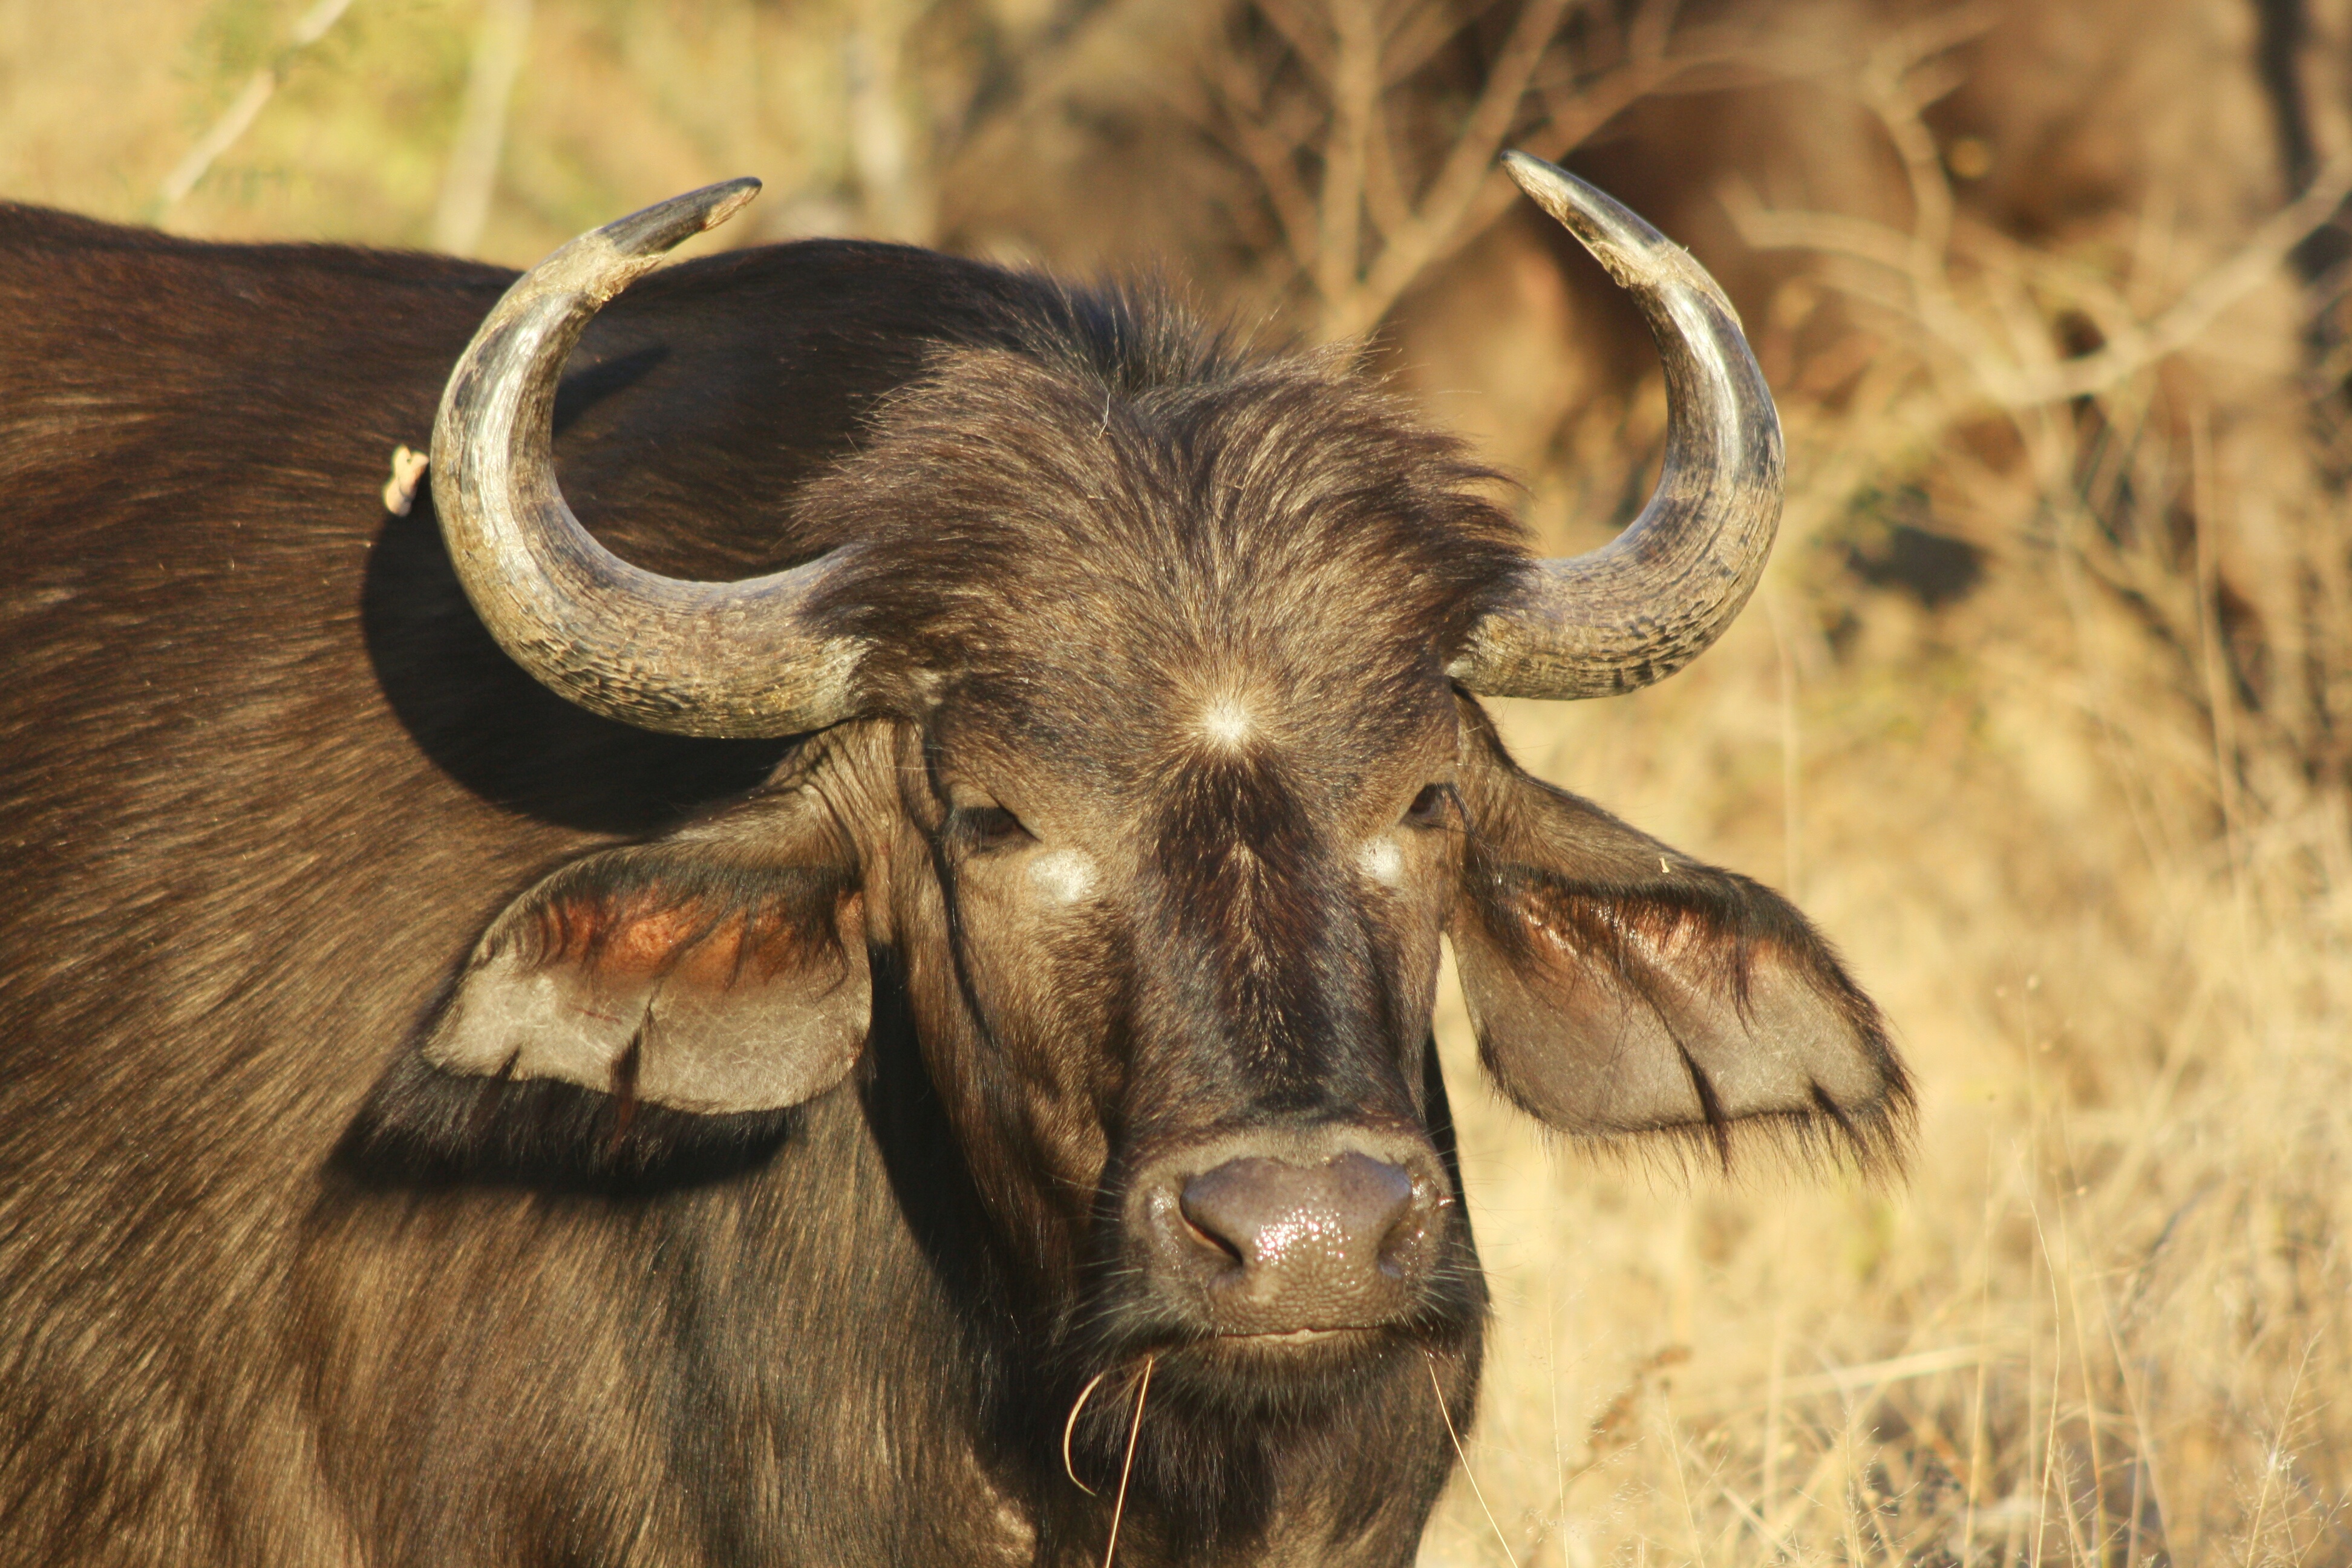 Good hair day for this auntie buffalo. Female buffalo may be identified by these tufts over their horns.